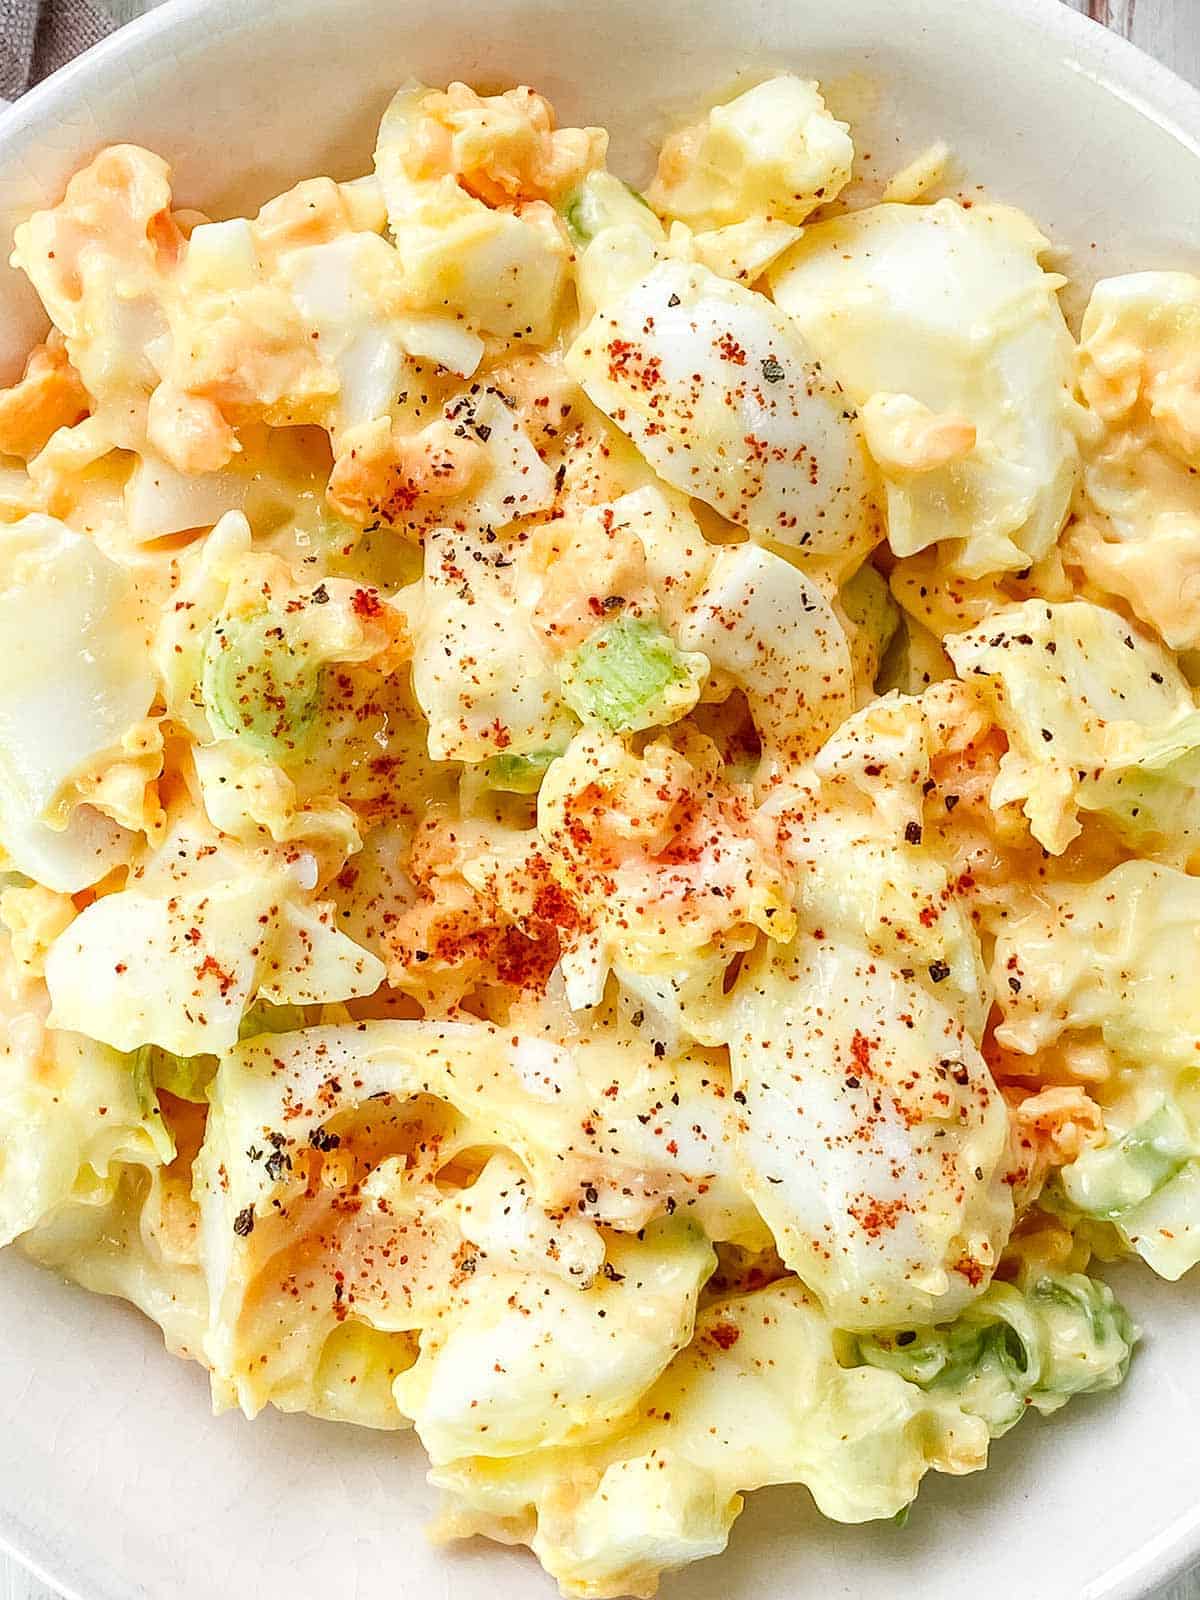 A close up of egg salad in a white bowl sprinkled with pepper and paprika